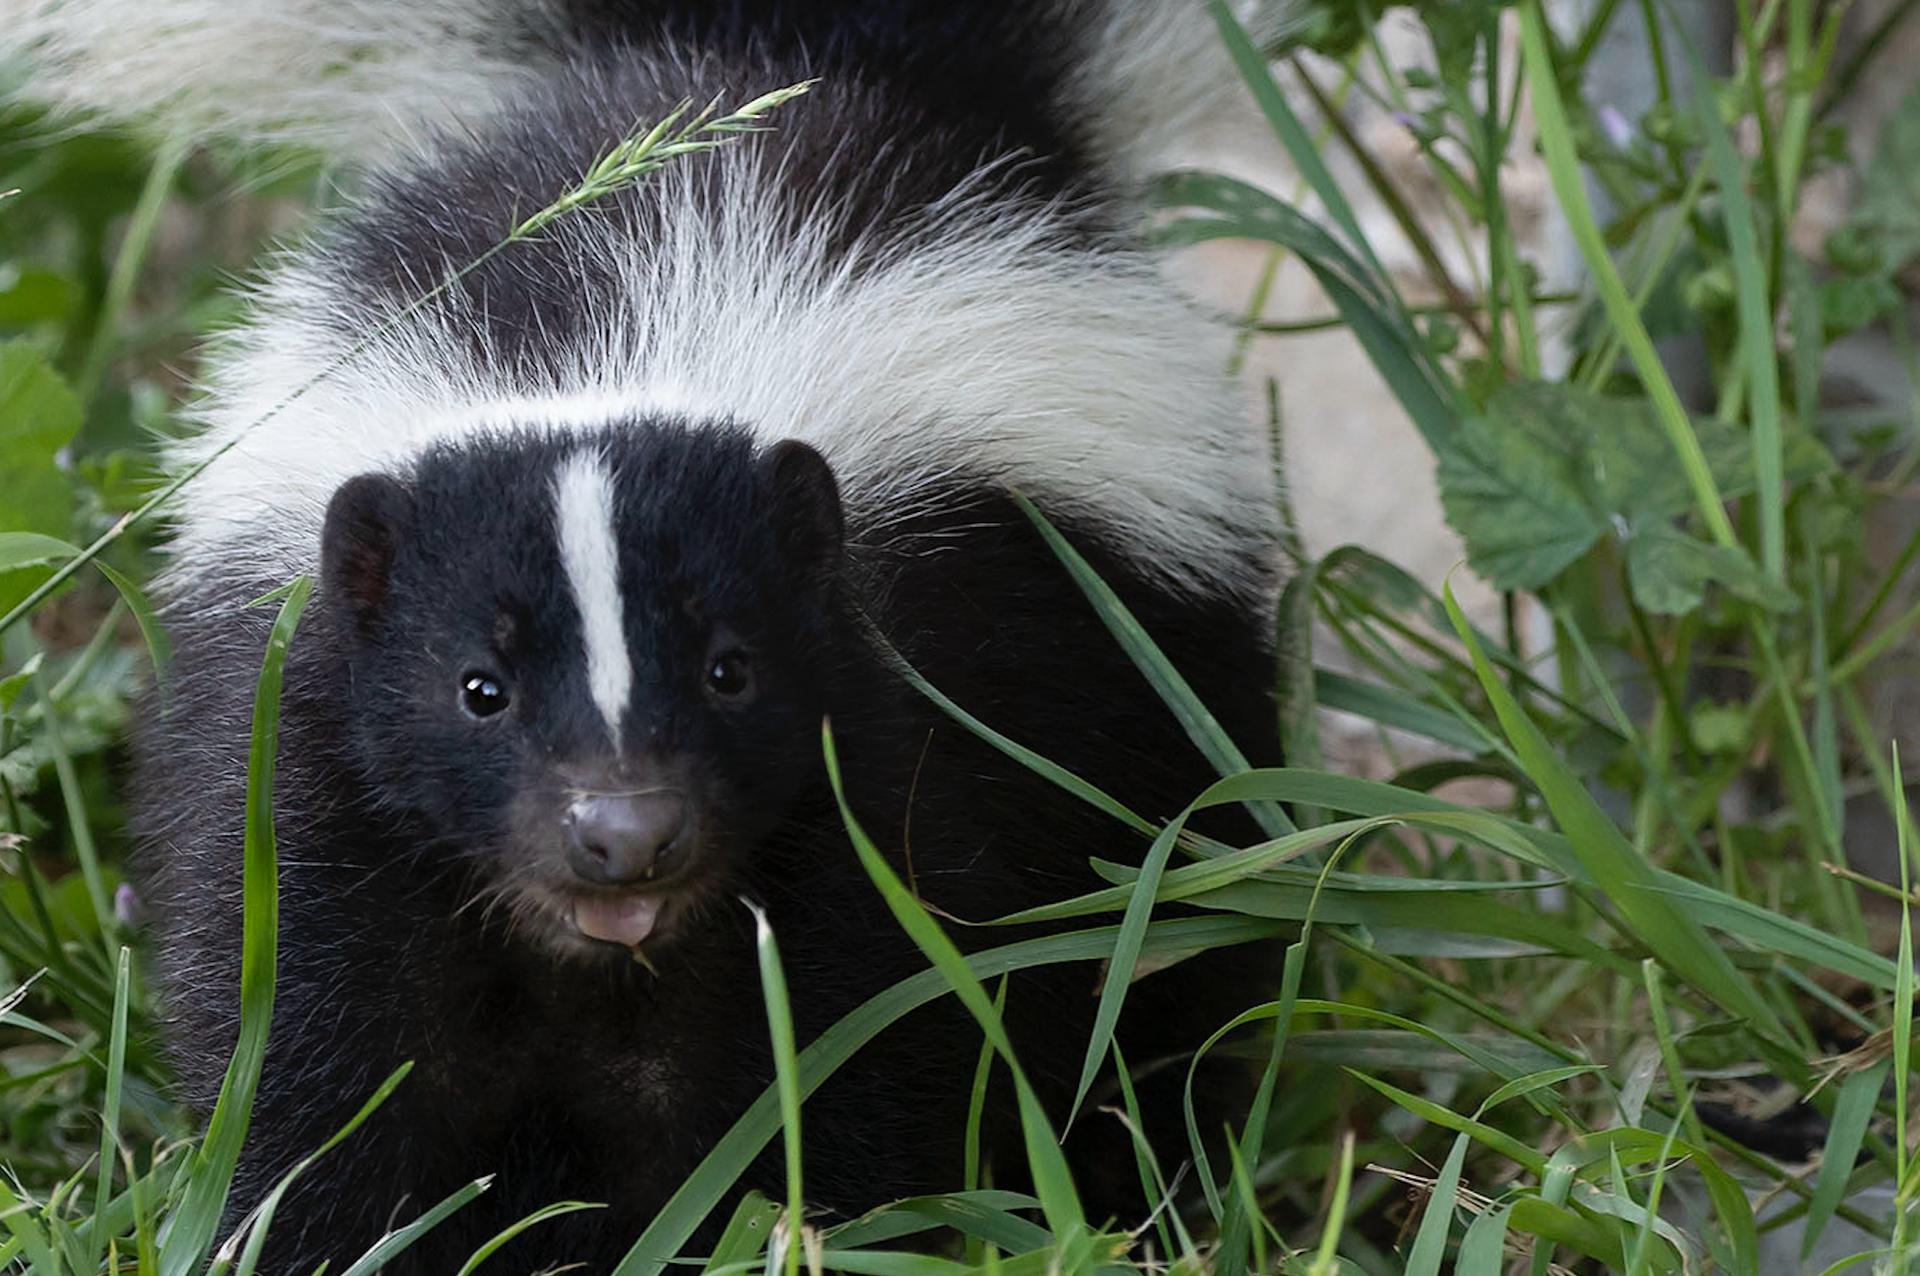 A black and white skunk is standing in the grass.